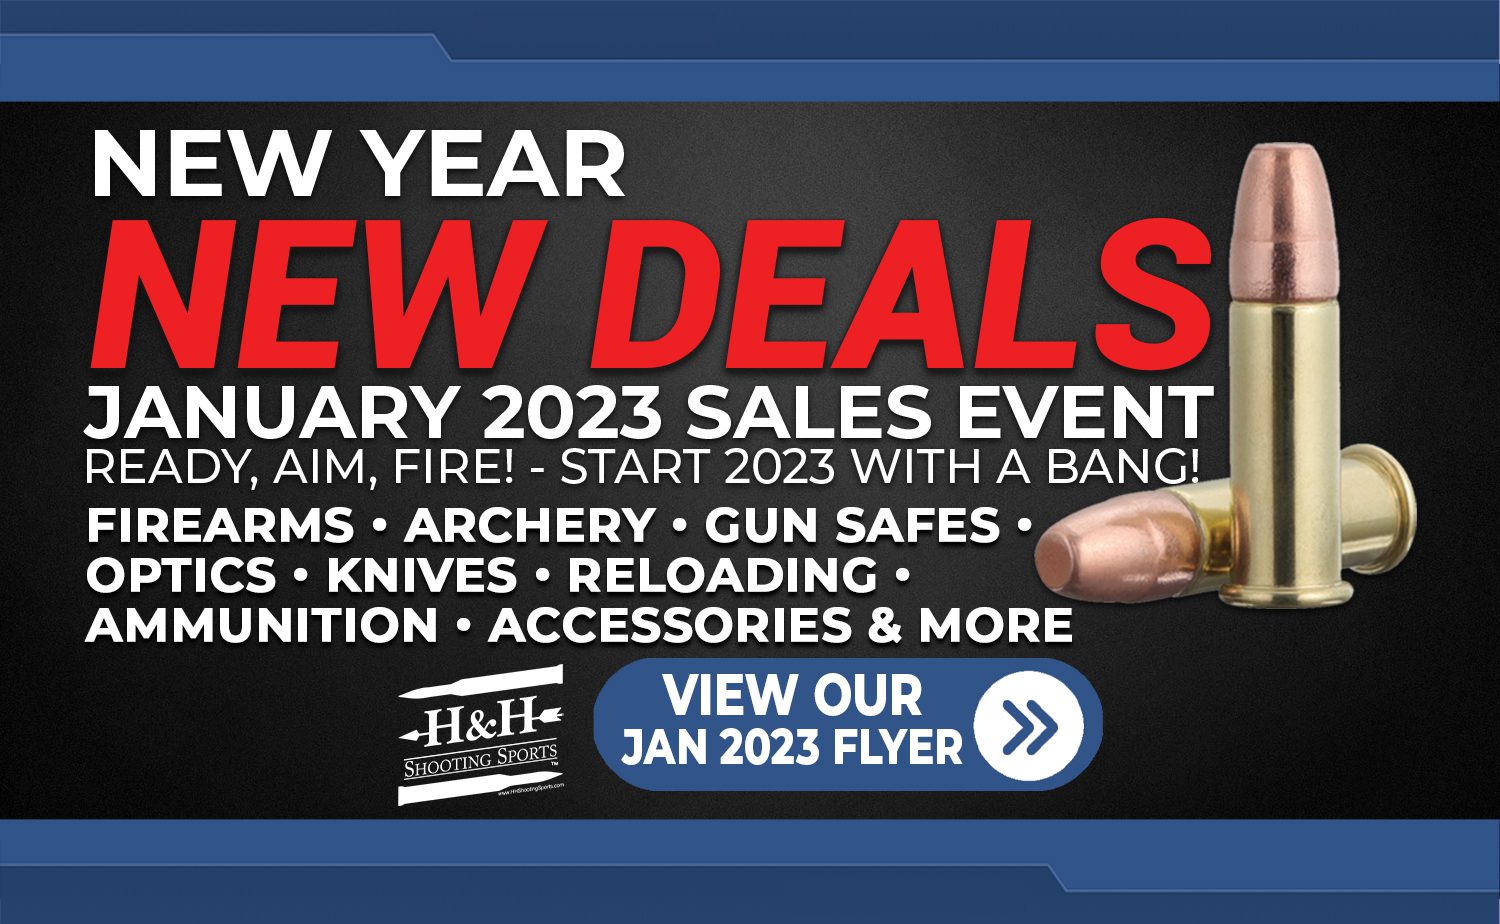 H&H Shooting Sports New Deals in Oklahoma City